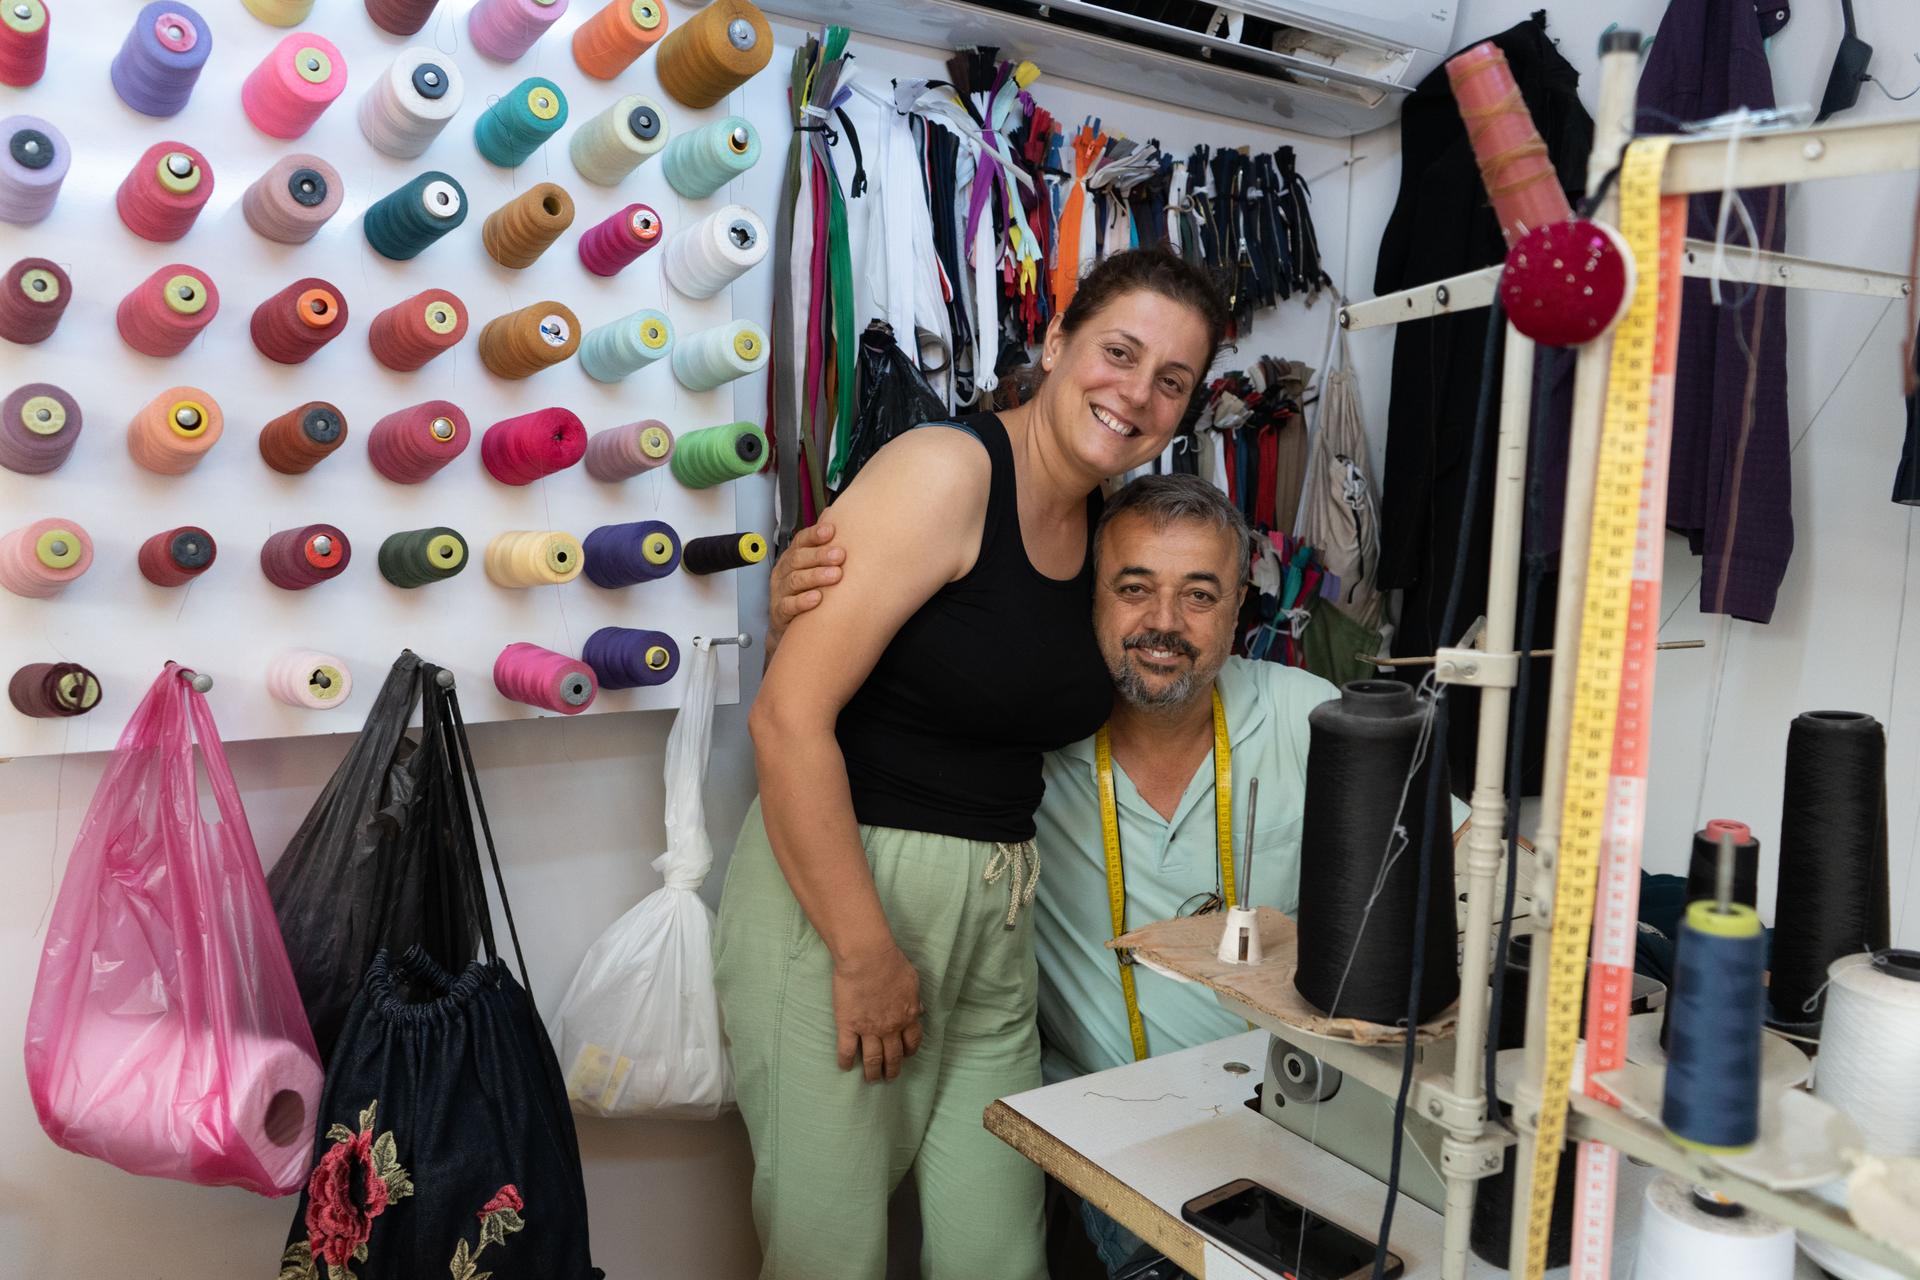 Semih and Serap Bozaydi reopened their tailoring shop in a market of small, prefabricated buildings set up by the government.